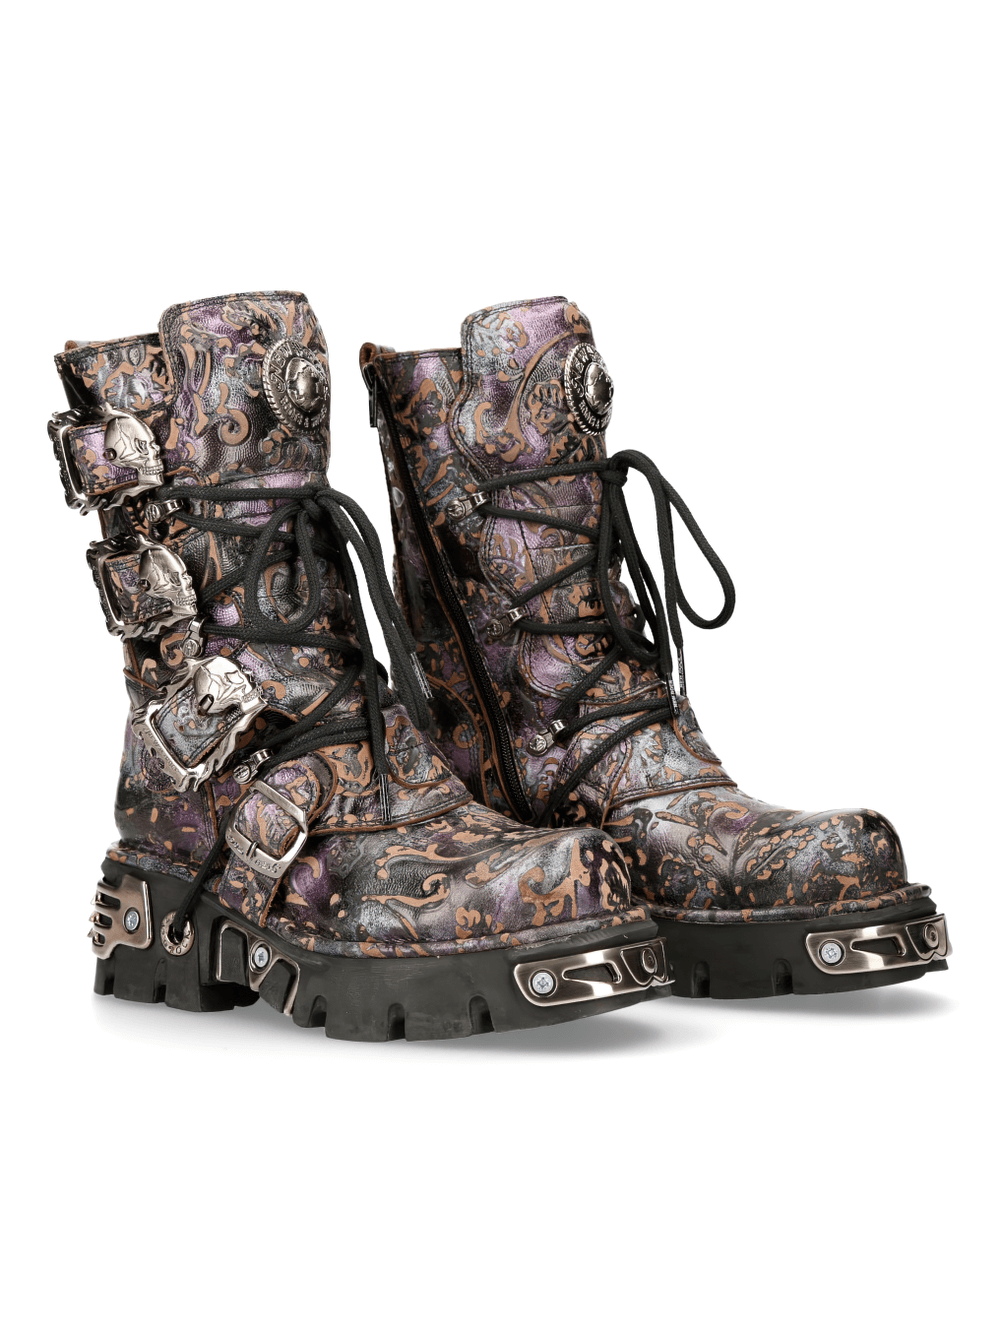 NEW ROCK Gothic Zippered High Boots with Metallic Accents